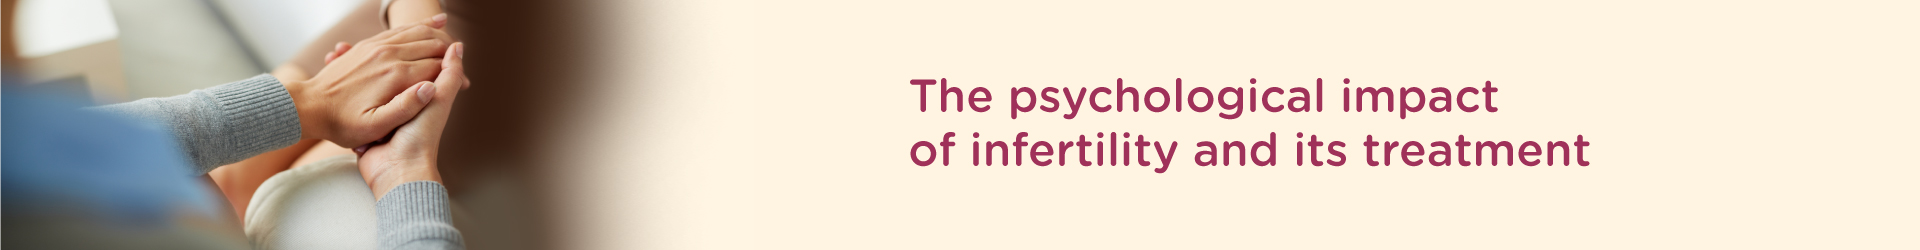 The Psychological Impact of Infertility Treatment